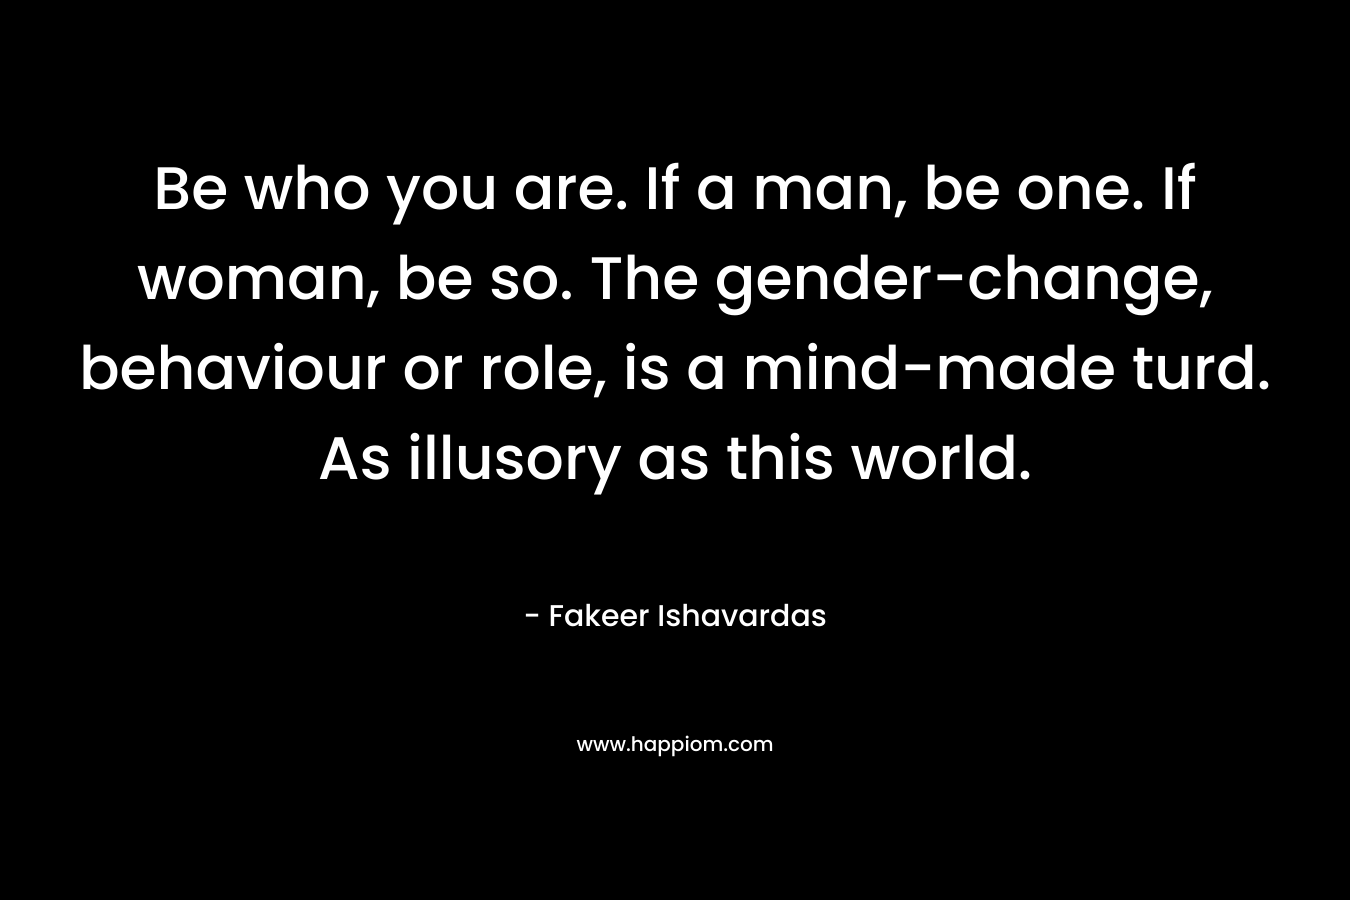 Be who you are. If a man, be one. If woman, be so. The gender-change, behaviour or role, is a mind-made turd. As illusory as this world.